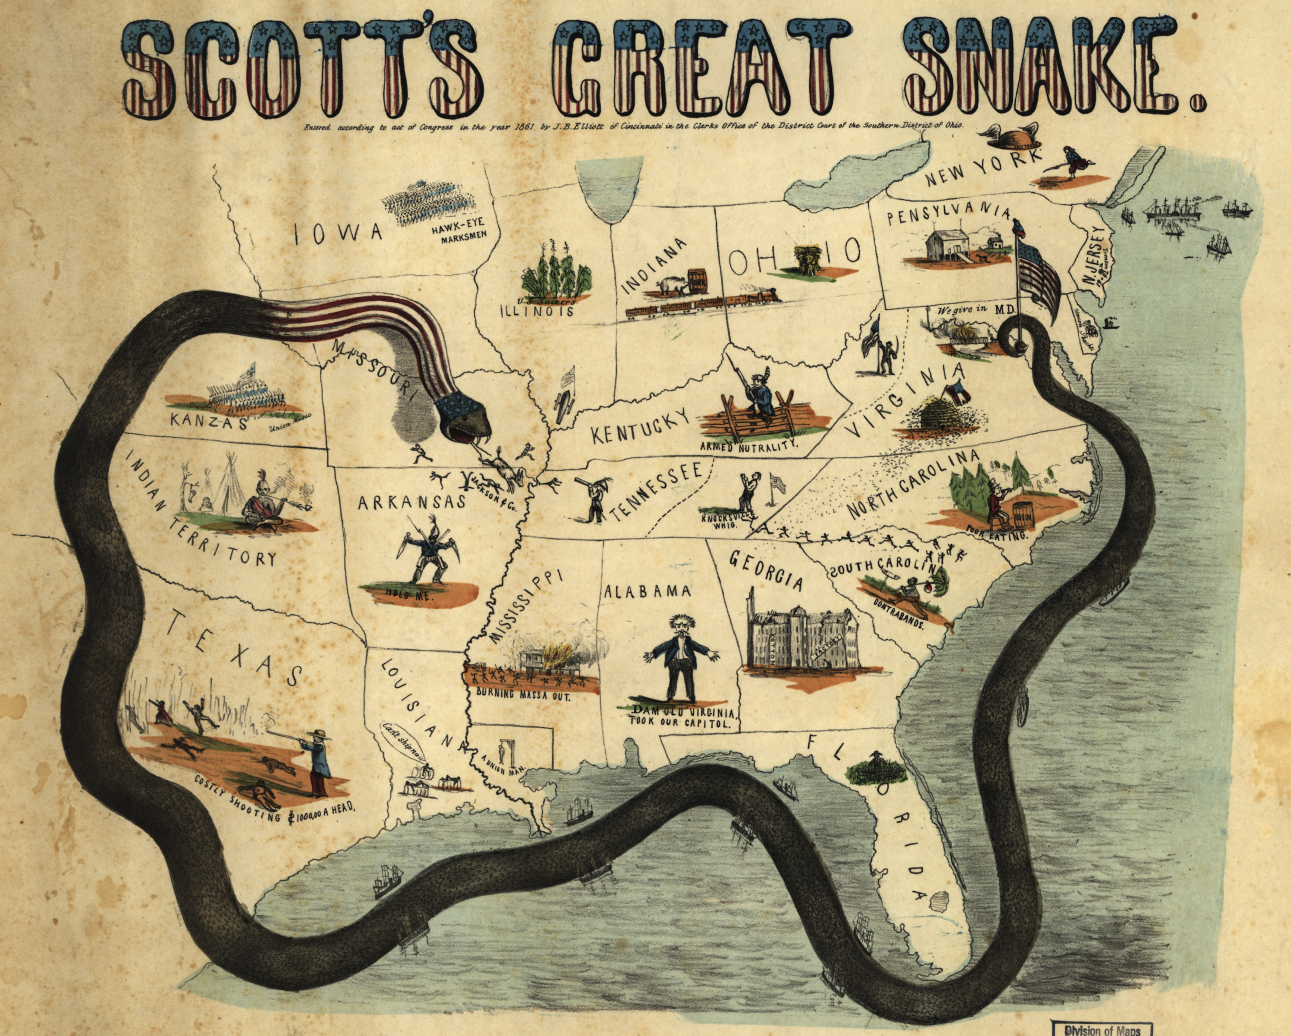 US map from the Civil War: Scott's Great Snake, see text above